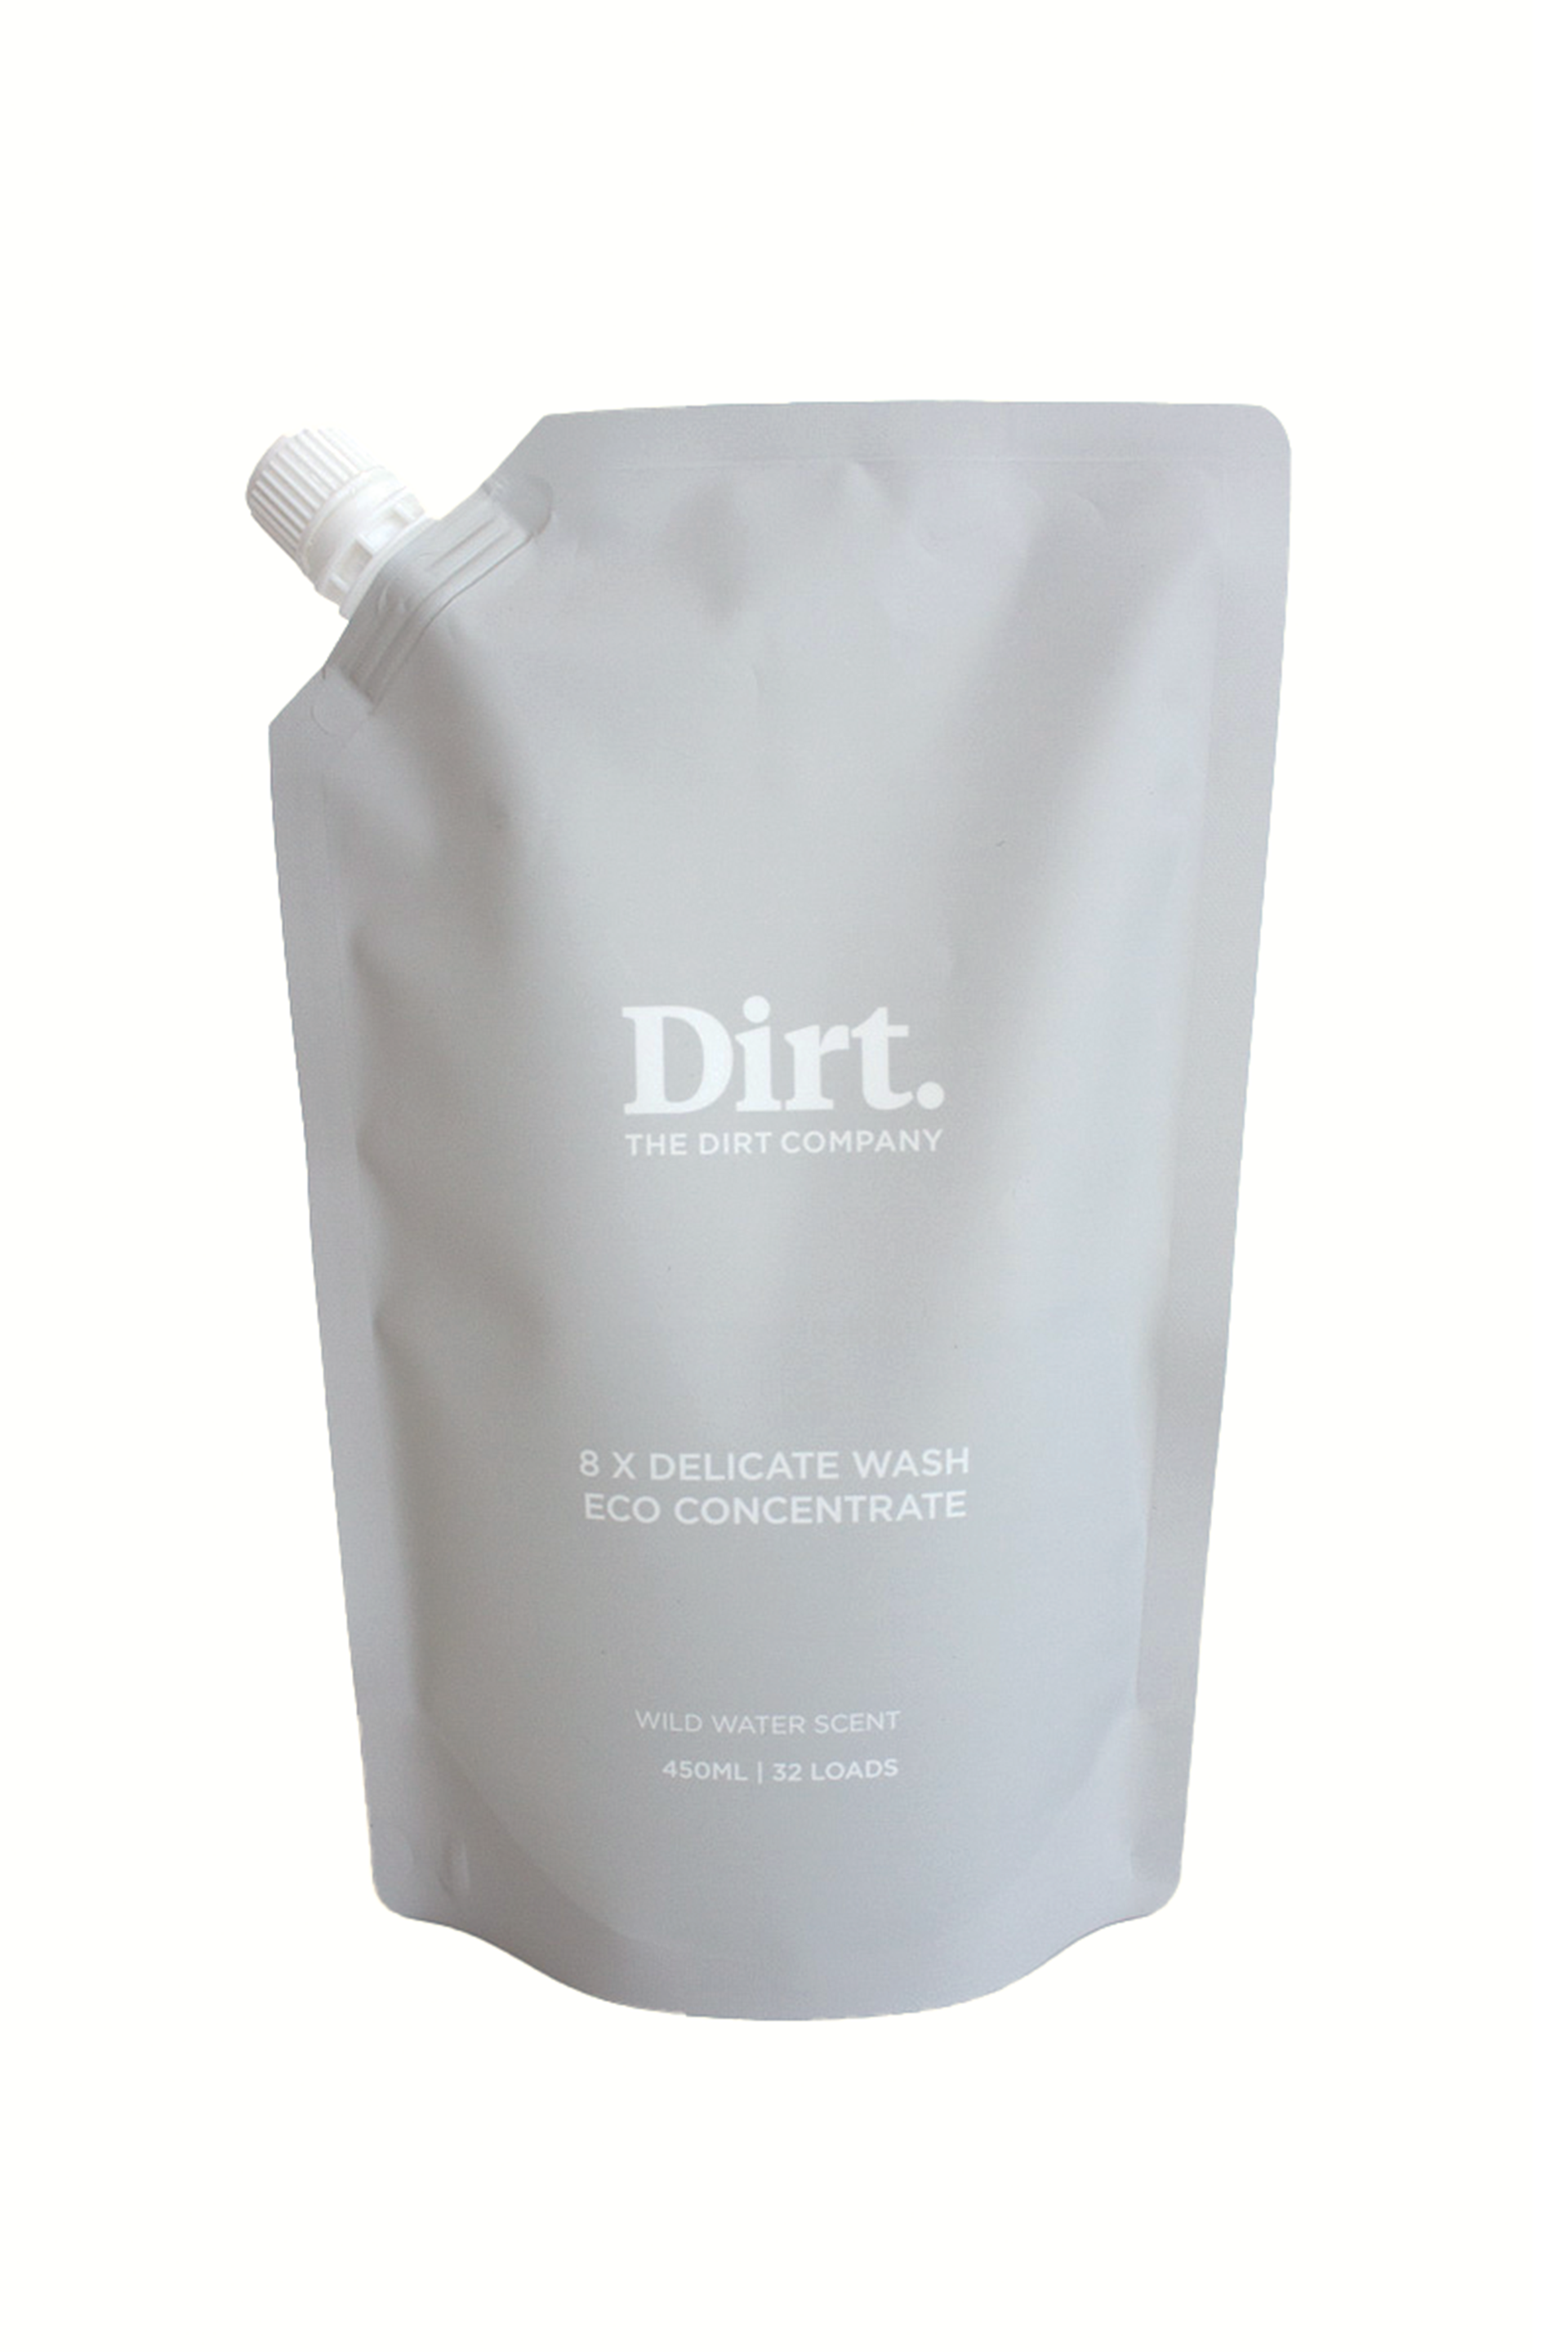 Cotton On Foundation - Dirt Delicate & Wool Wash Refill - 450ml refill